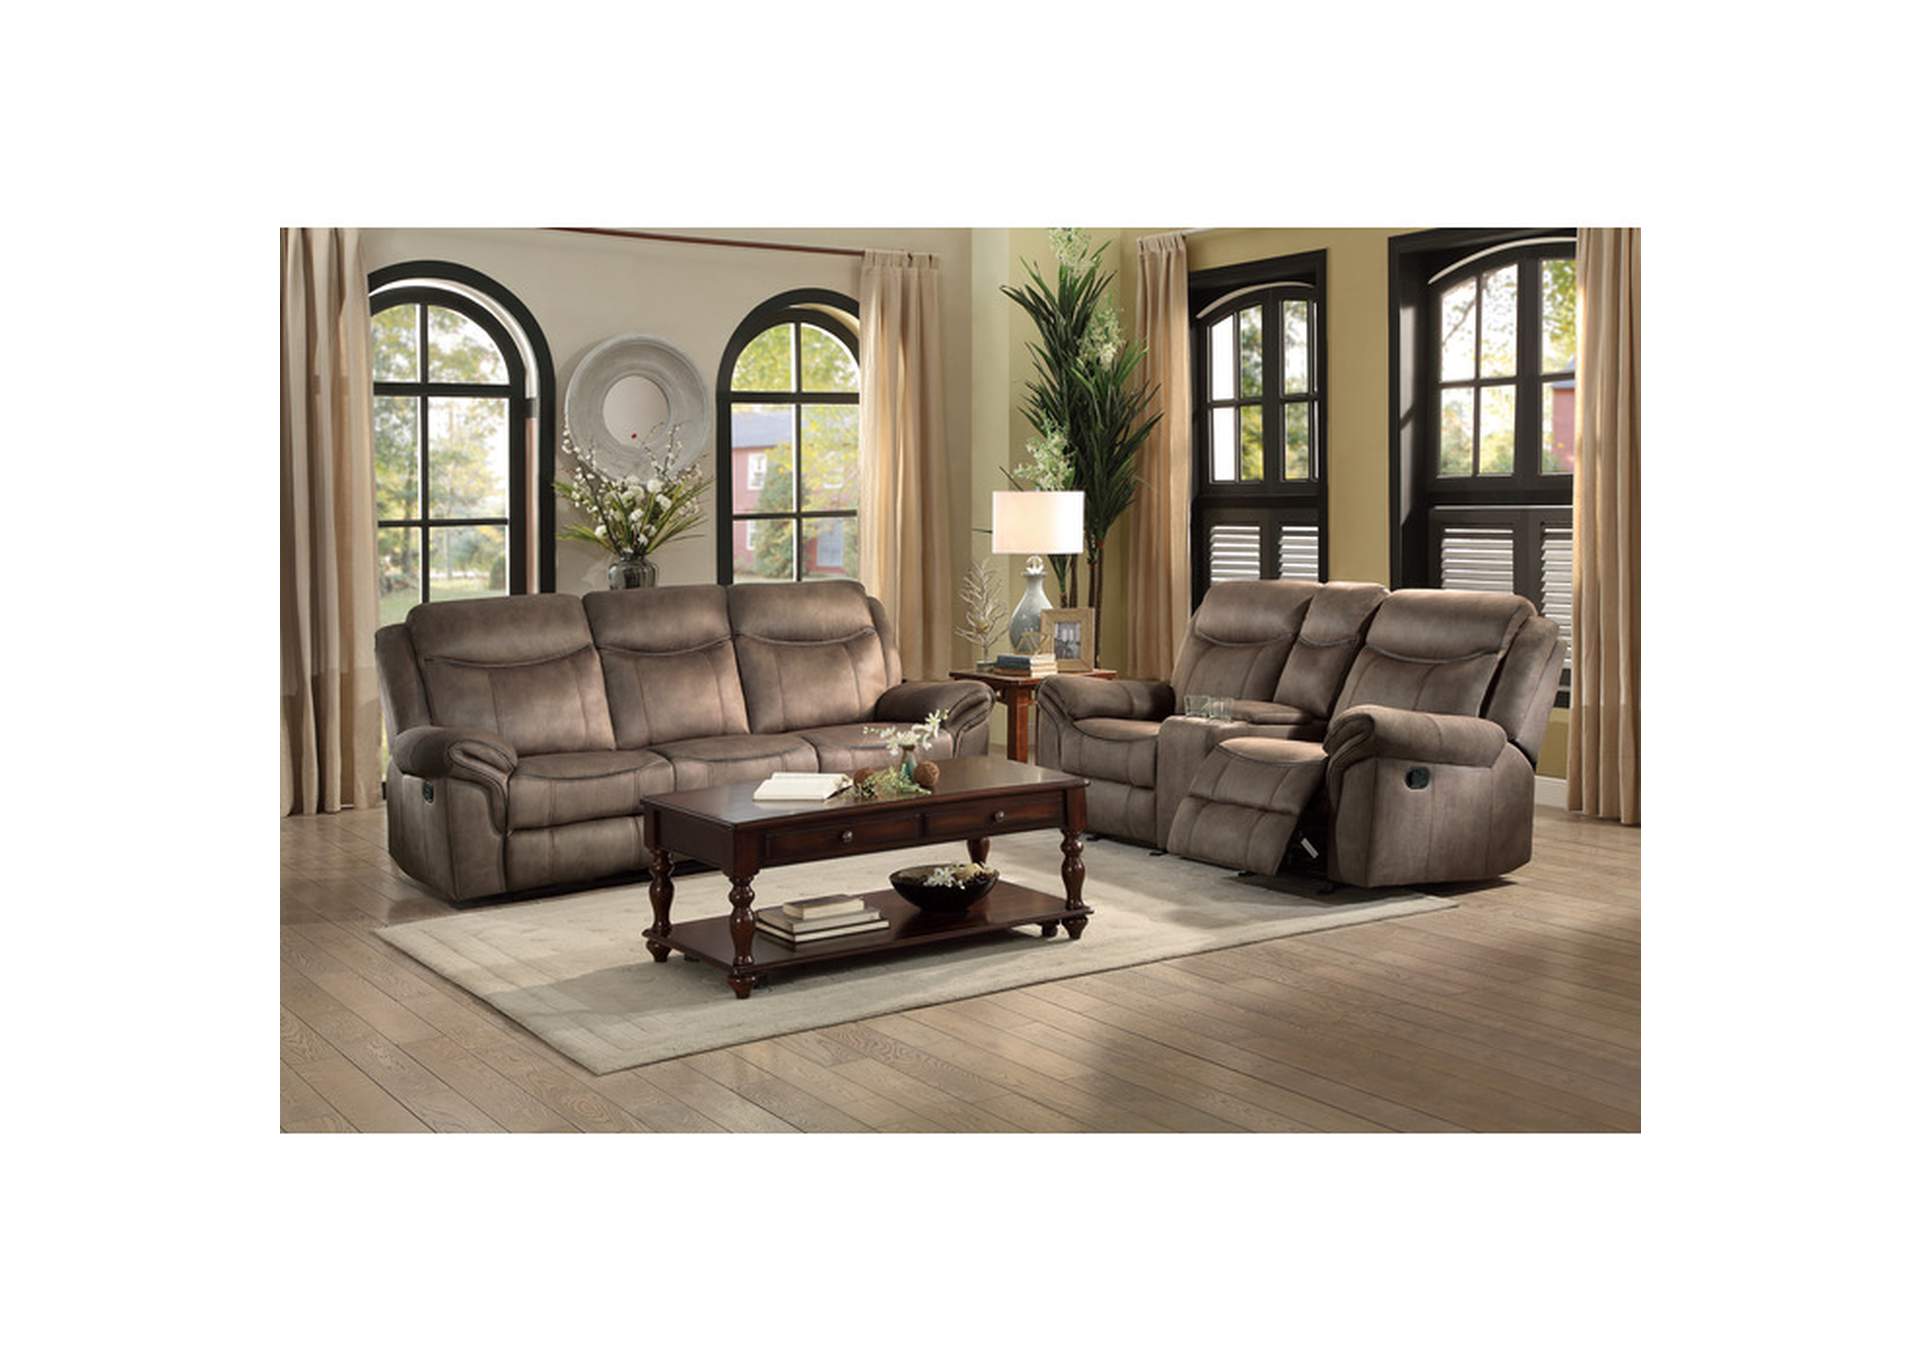 Aram Double Reclining Sofa with Center Drop-Down Cup Holders, Receptacles, Hidden Drawer and USB Ports,Homelegance